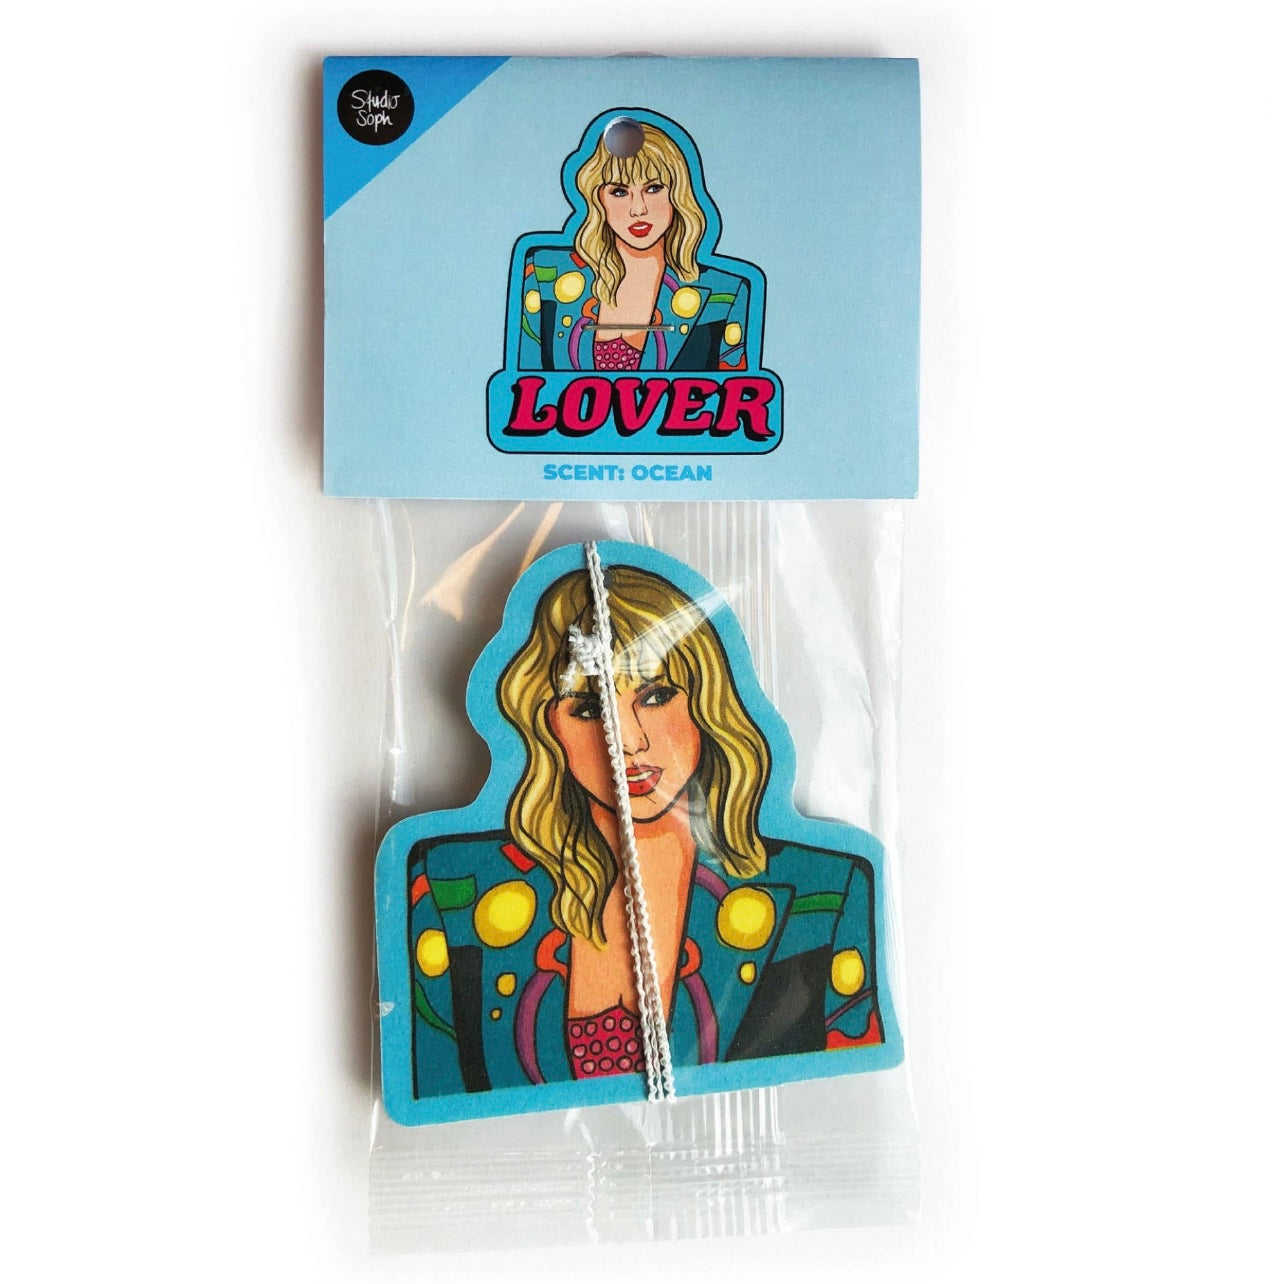 Taylor Swift Magnet – Mary Kathryn Design